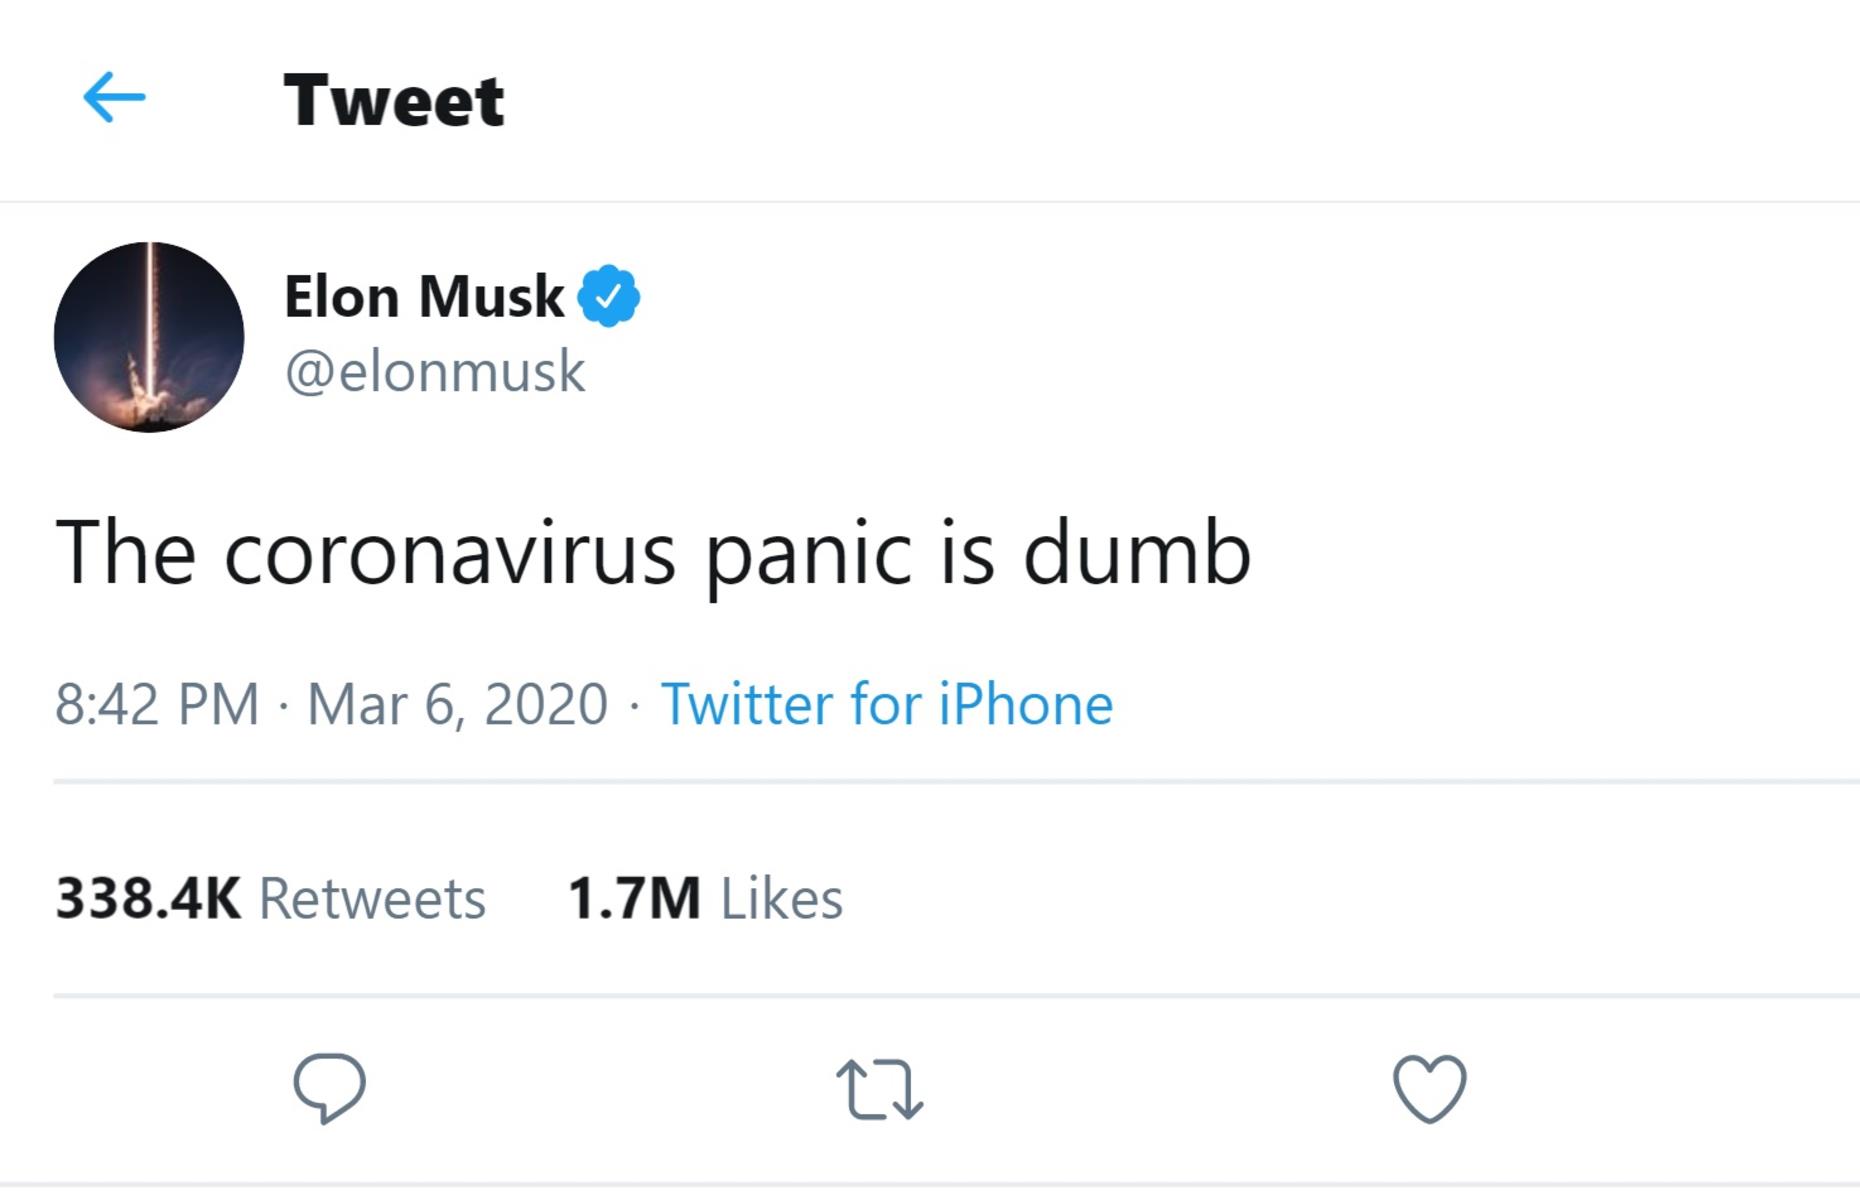 <p>Musk has long been a controversial figure on Twitter, but on 6 March 2020 he took things to another level, tweeting "the coronavirus panic is dumb", to the anger of many. This came just five days before the World Health Organization declared coronavirus a pandemic. On 19 March he further angered people by tweeting that "kids are essentially immune" to the virus, despite clear evidence to the contrary. Twitter has said it will remove tweets spreading misinformation although at present the tweet still remains.</p>